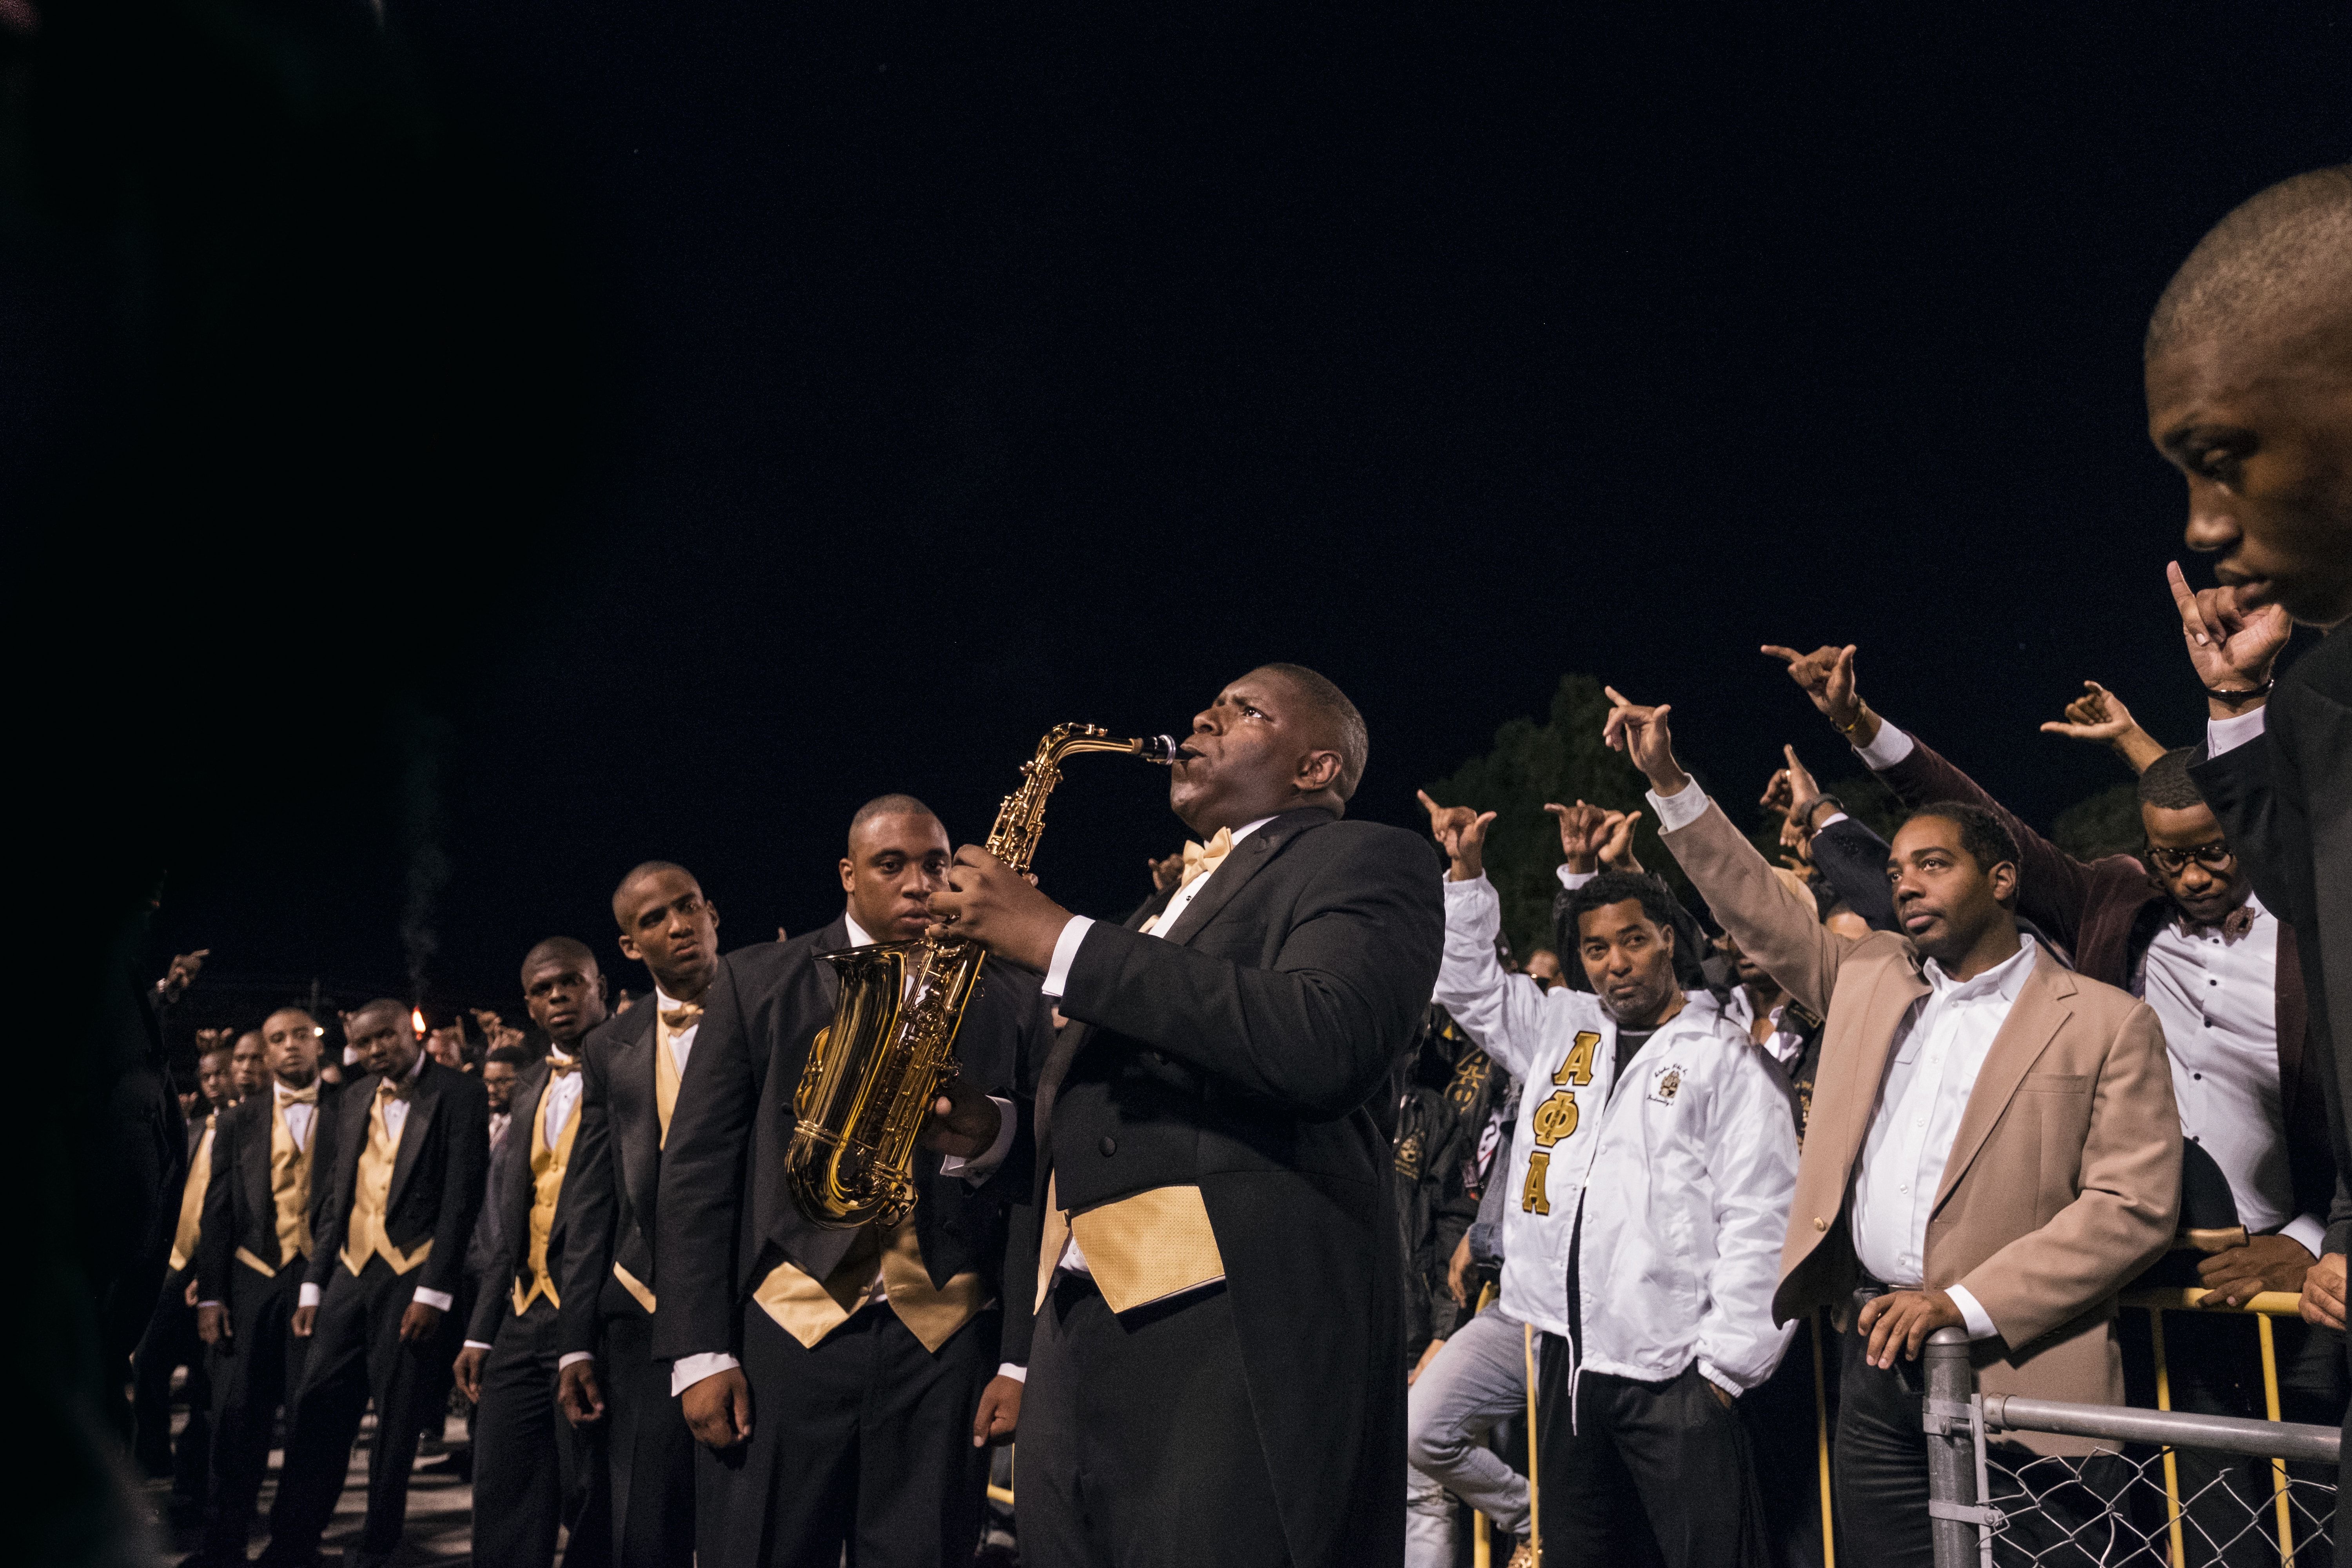 Alpha Phi Alpha fraternity alumni at Clark Atlanta University welcome new members (left) of the oldest Greek-lettered organization for African Americans, which counts Frederick Douglass, W.E.B. Du Bois, and Martin Luther King, Jr., in its ranks. Image by Nina Robinson. United States, 2017.
